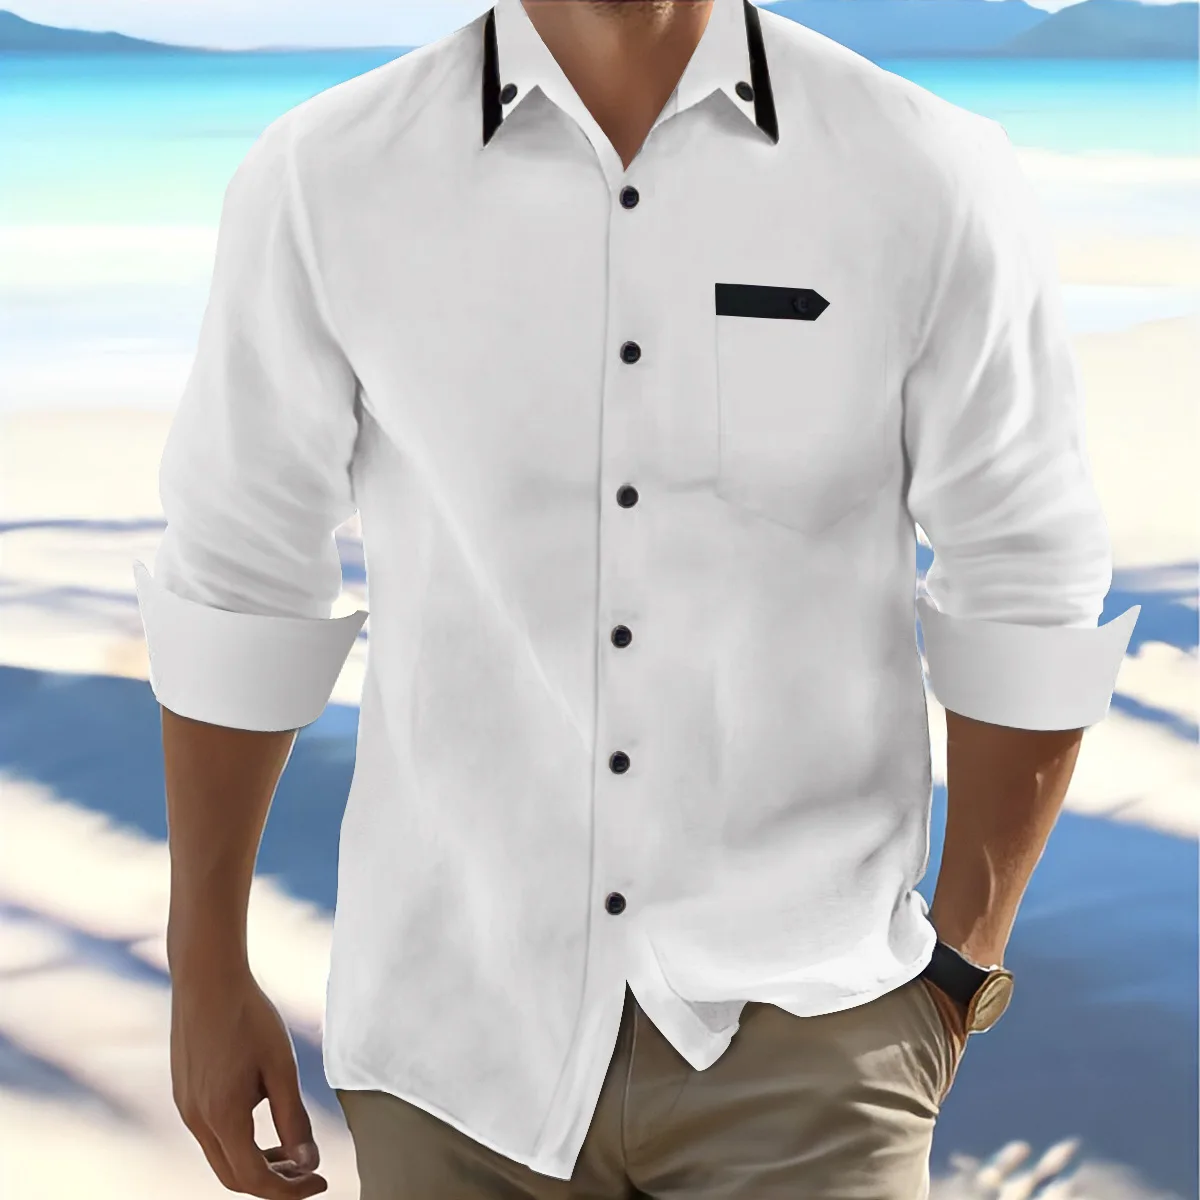 

New Fashion Men Spring And Autumn Men's Business Casual Shirt Long Sleeve Shir